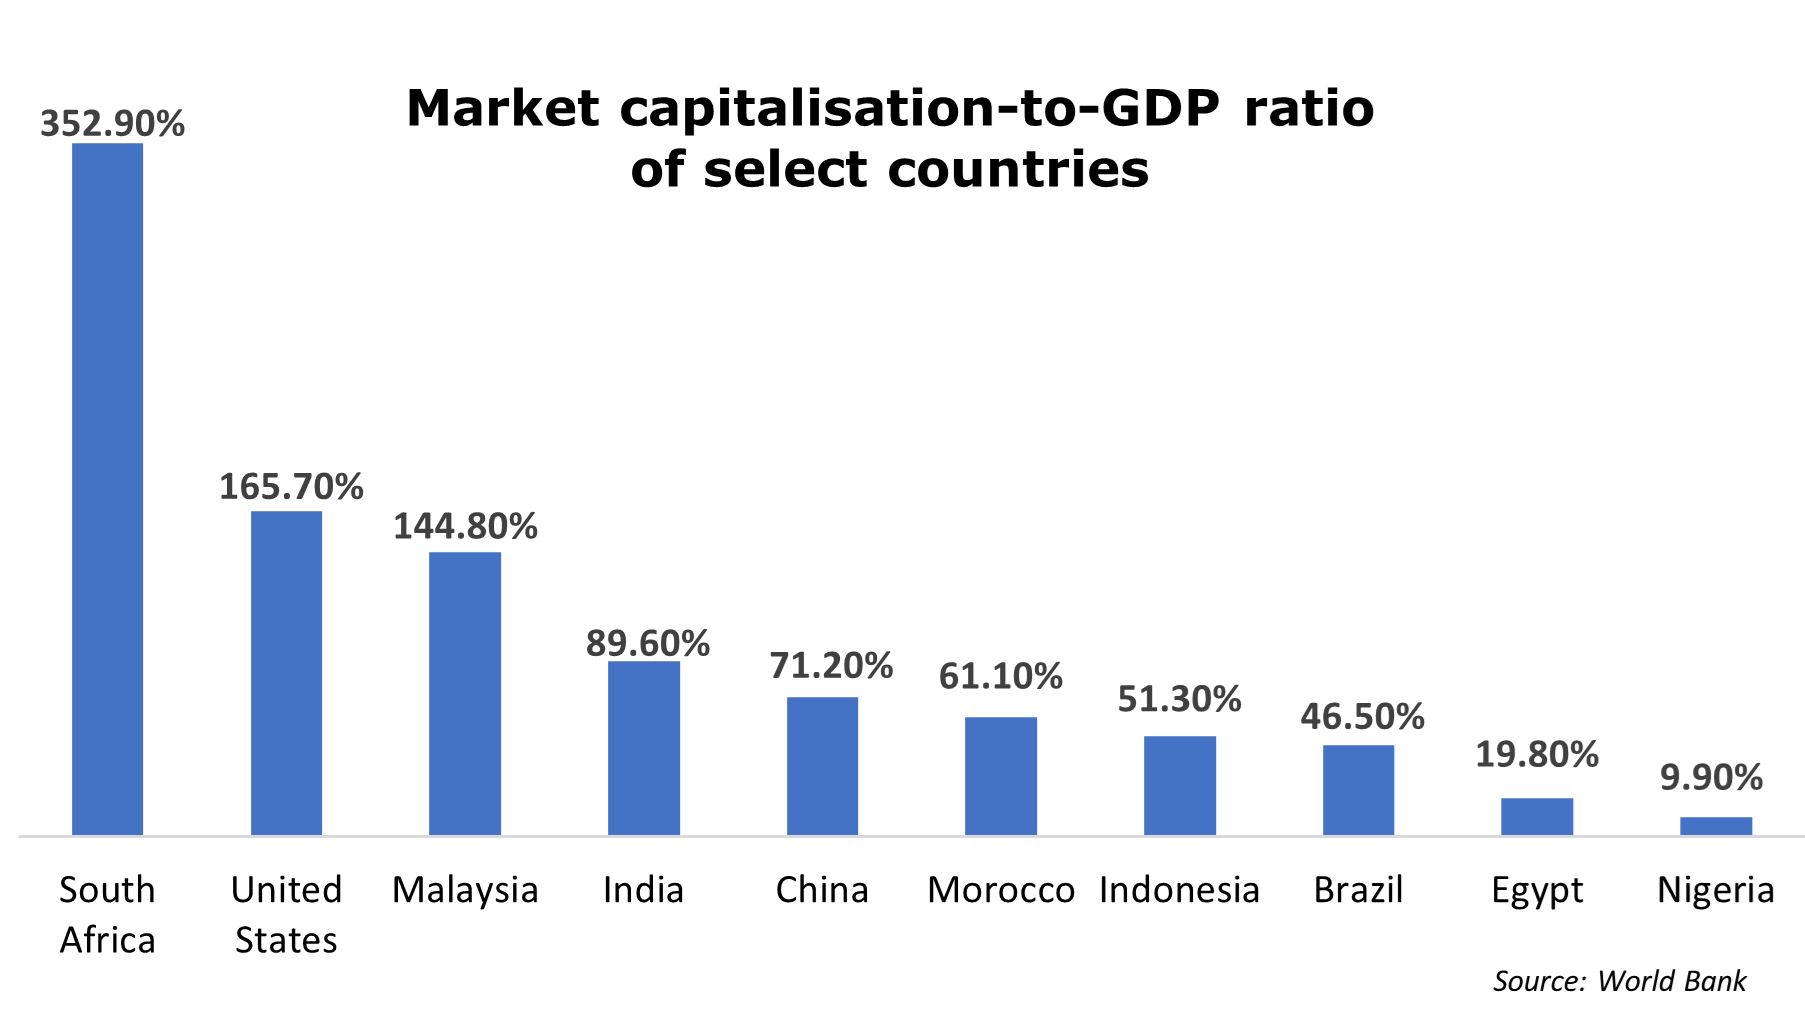 Figure of market capitalisation-to-GDP ratio of select countries